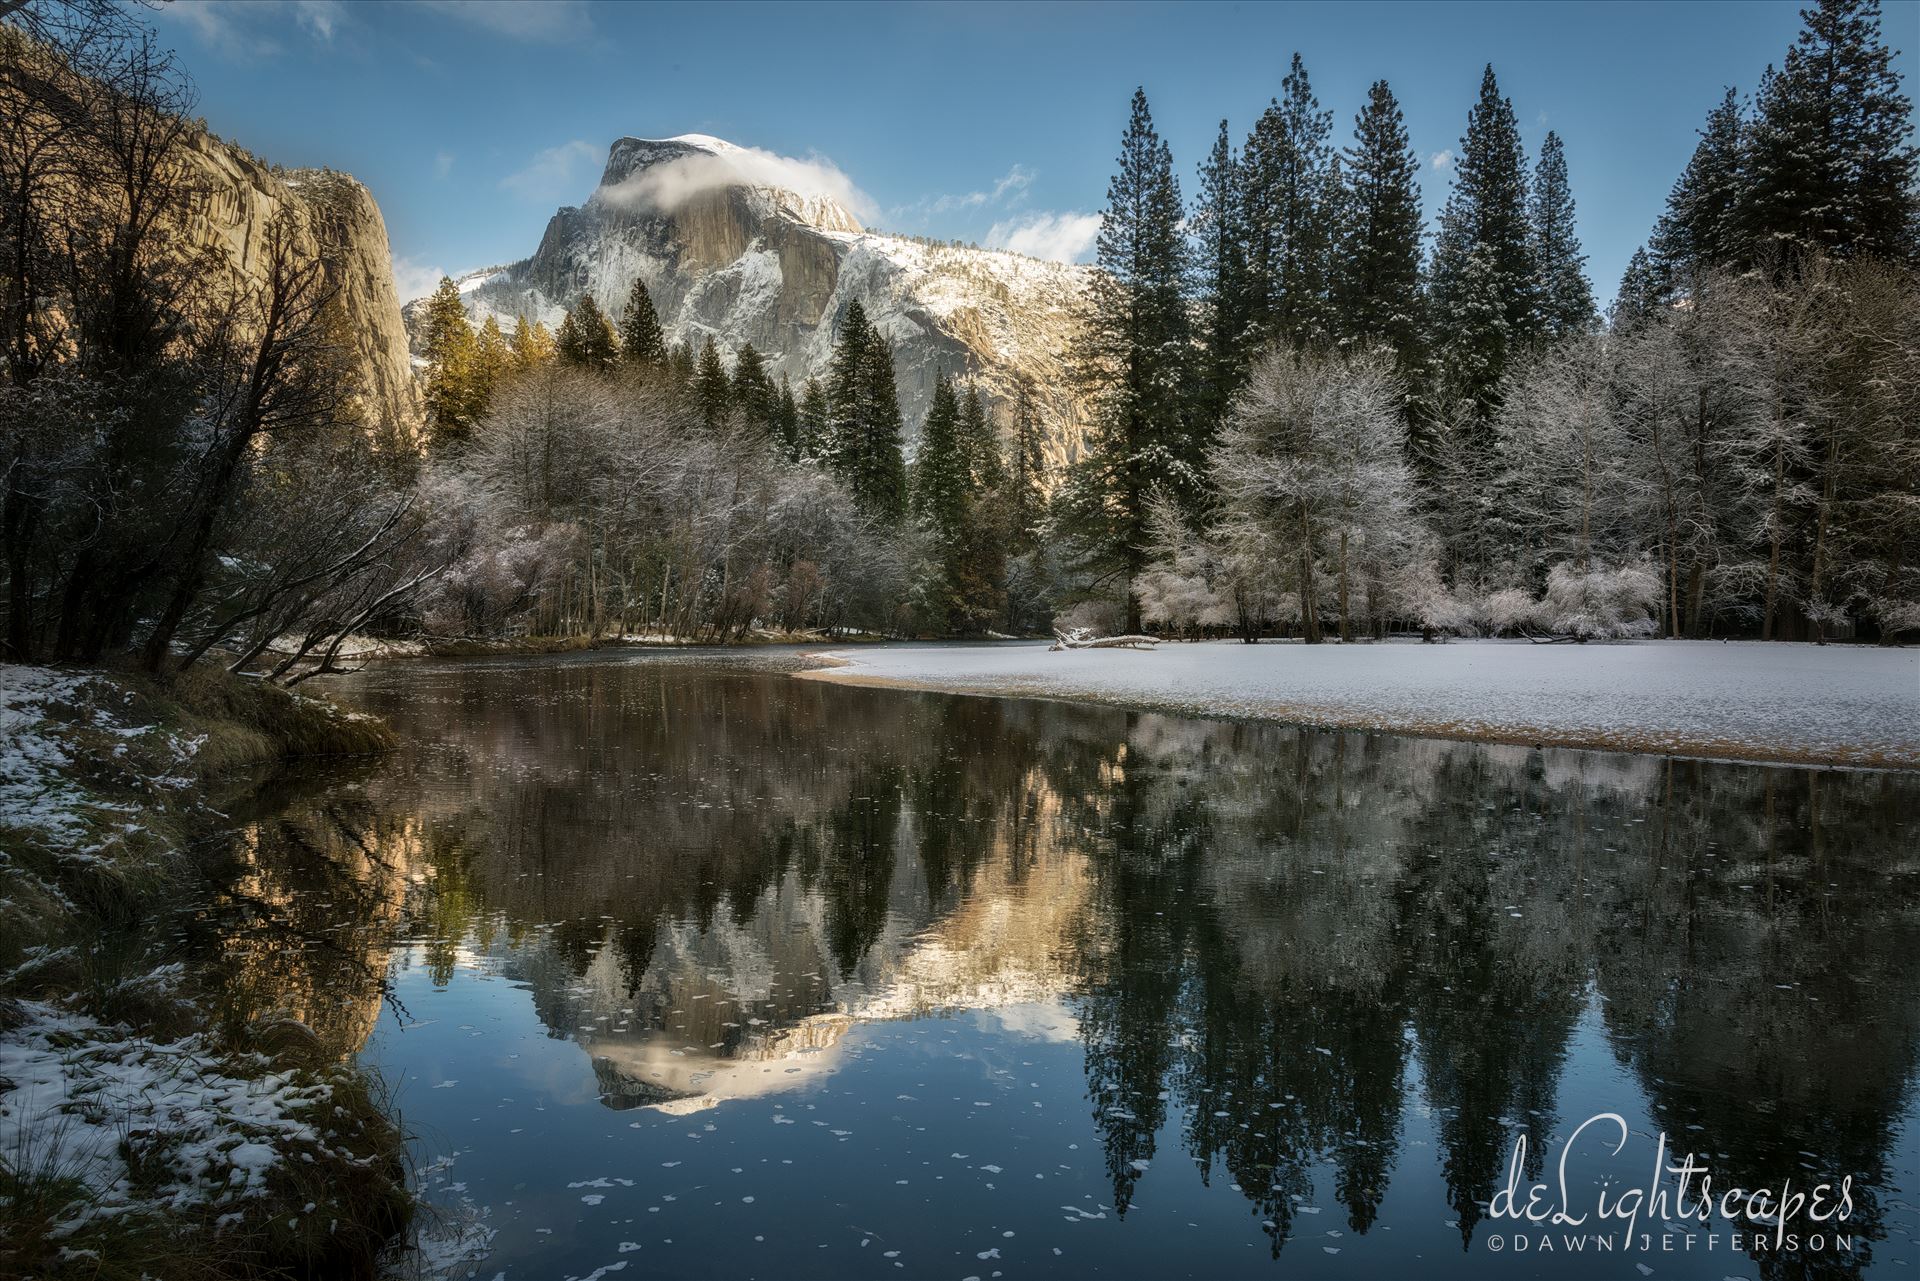 Reflecting on Half Dome in Winter - Yosemite National Park in winter is magical, especially when you can catch Half Dome reflecting so nicely on the Merced River. by Dawn Jefferson